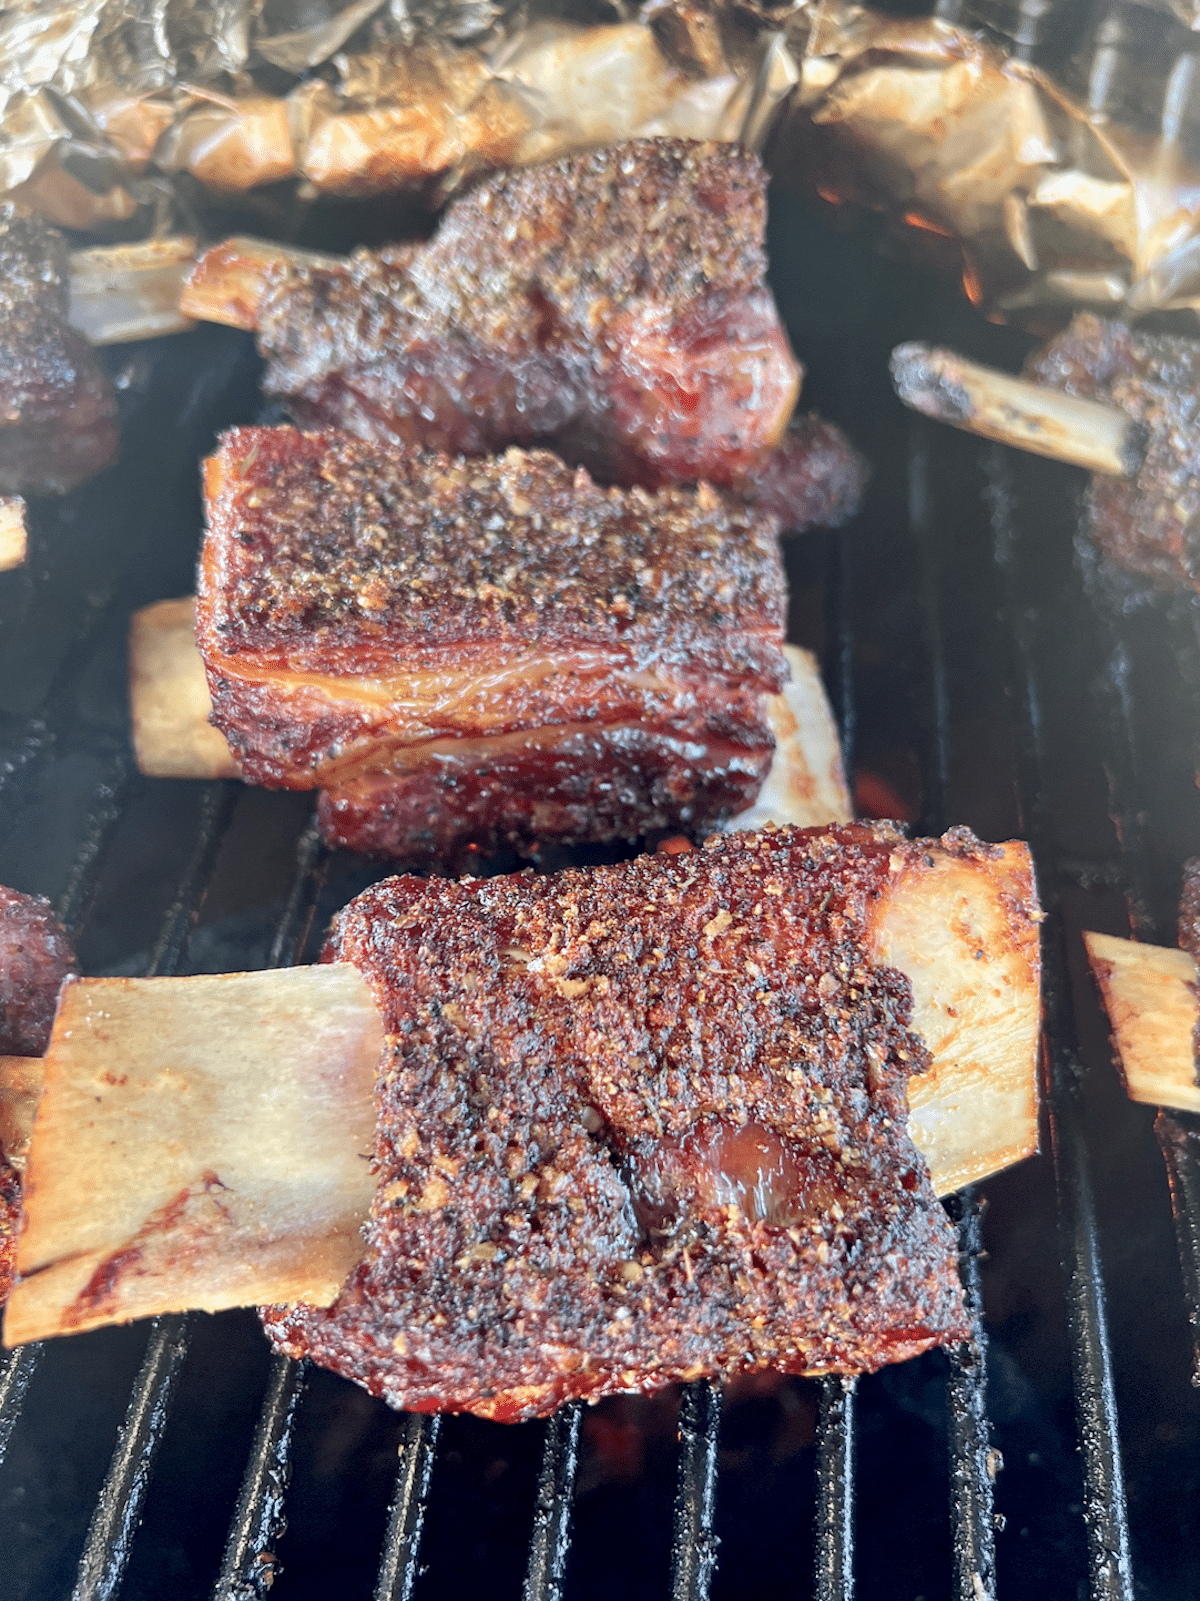 Beef ribs cooking on a grill.